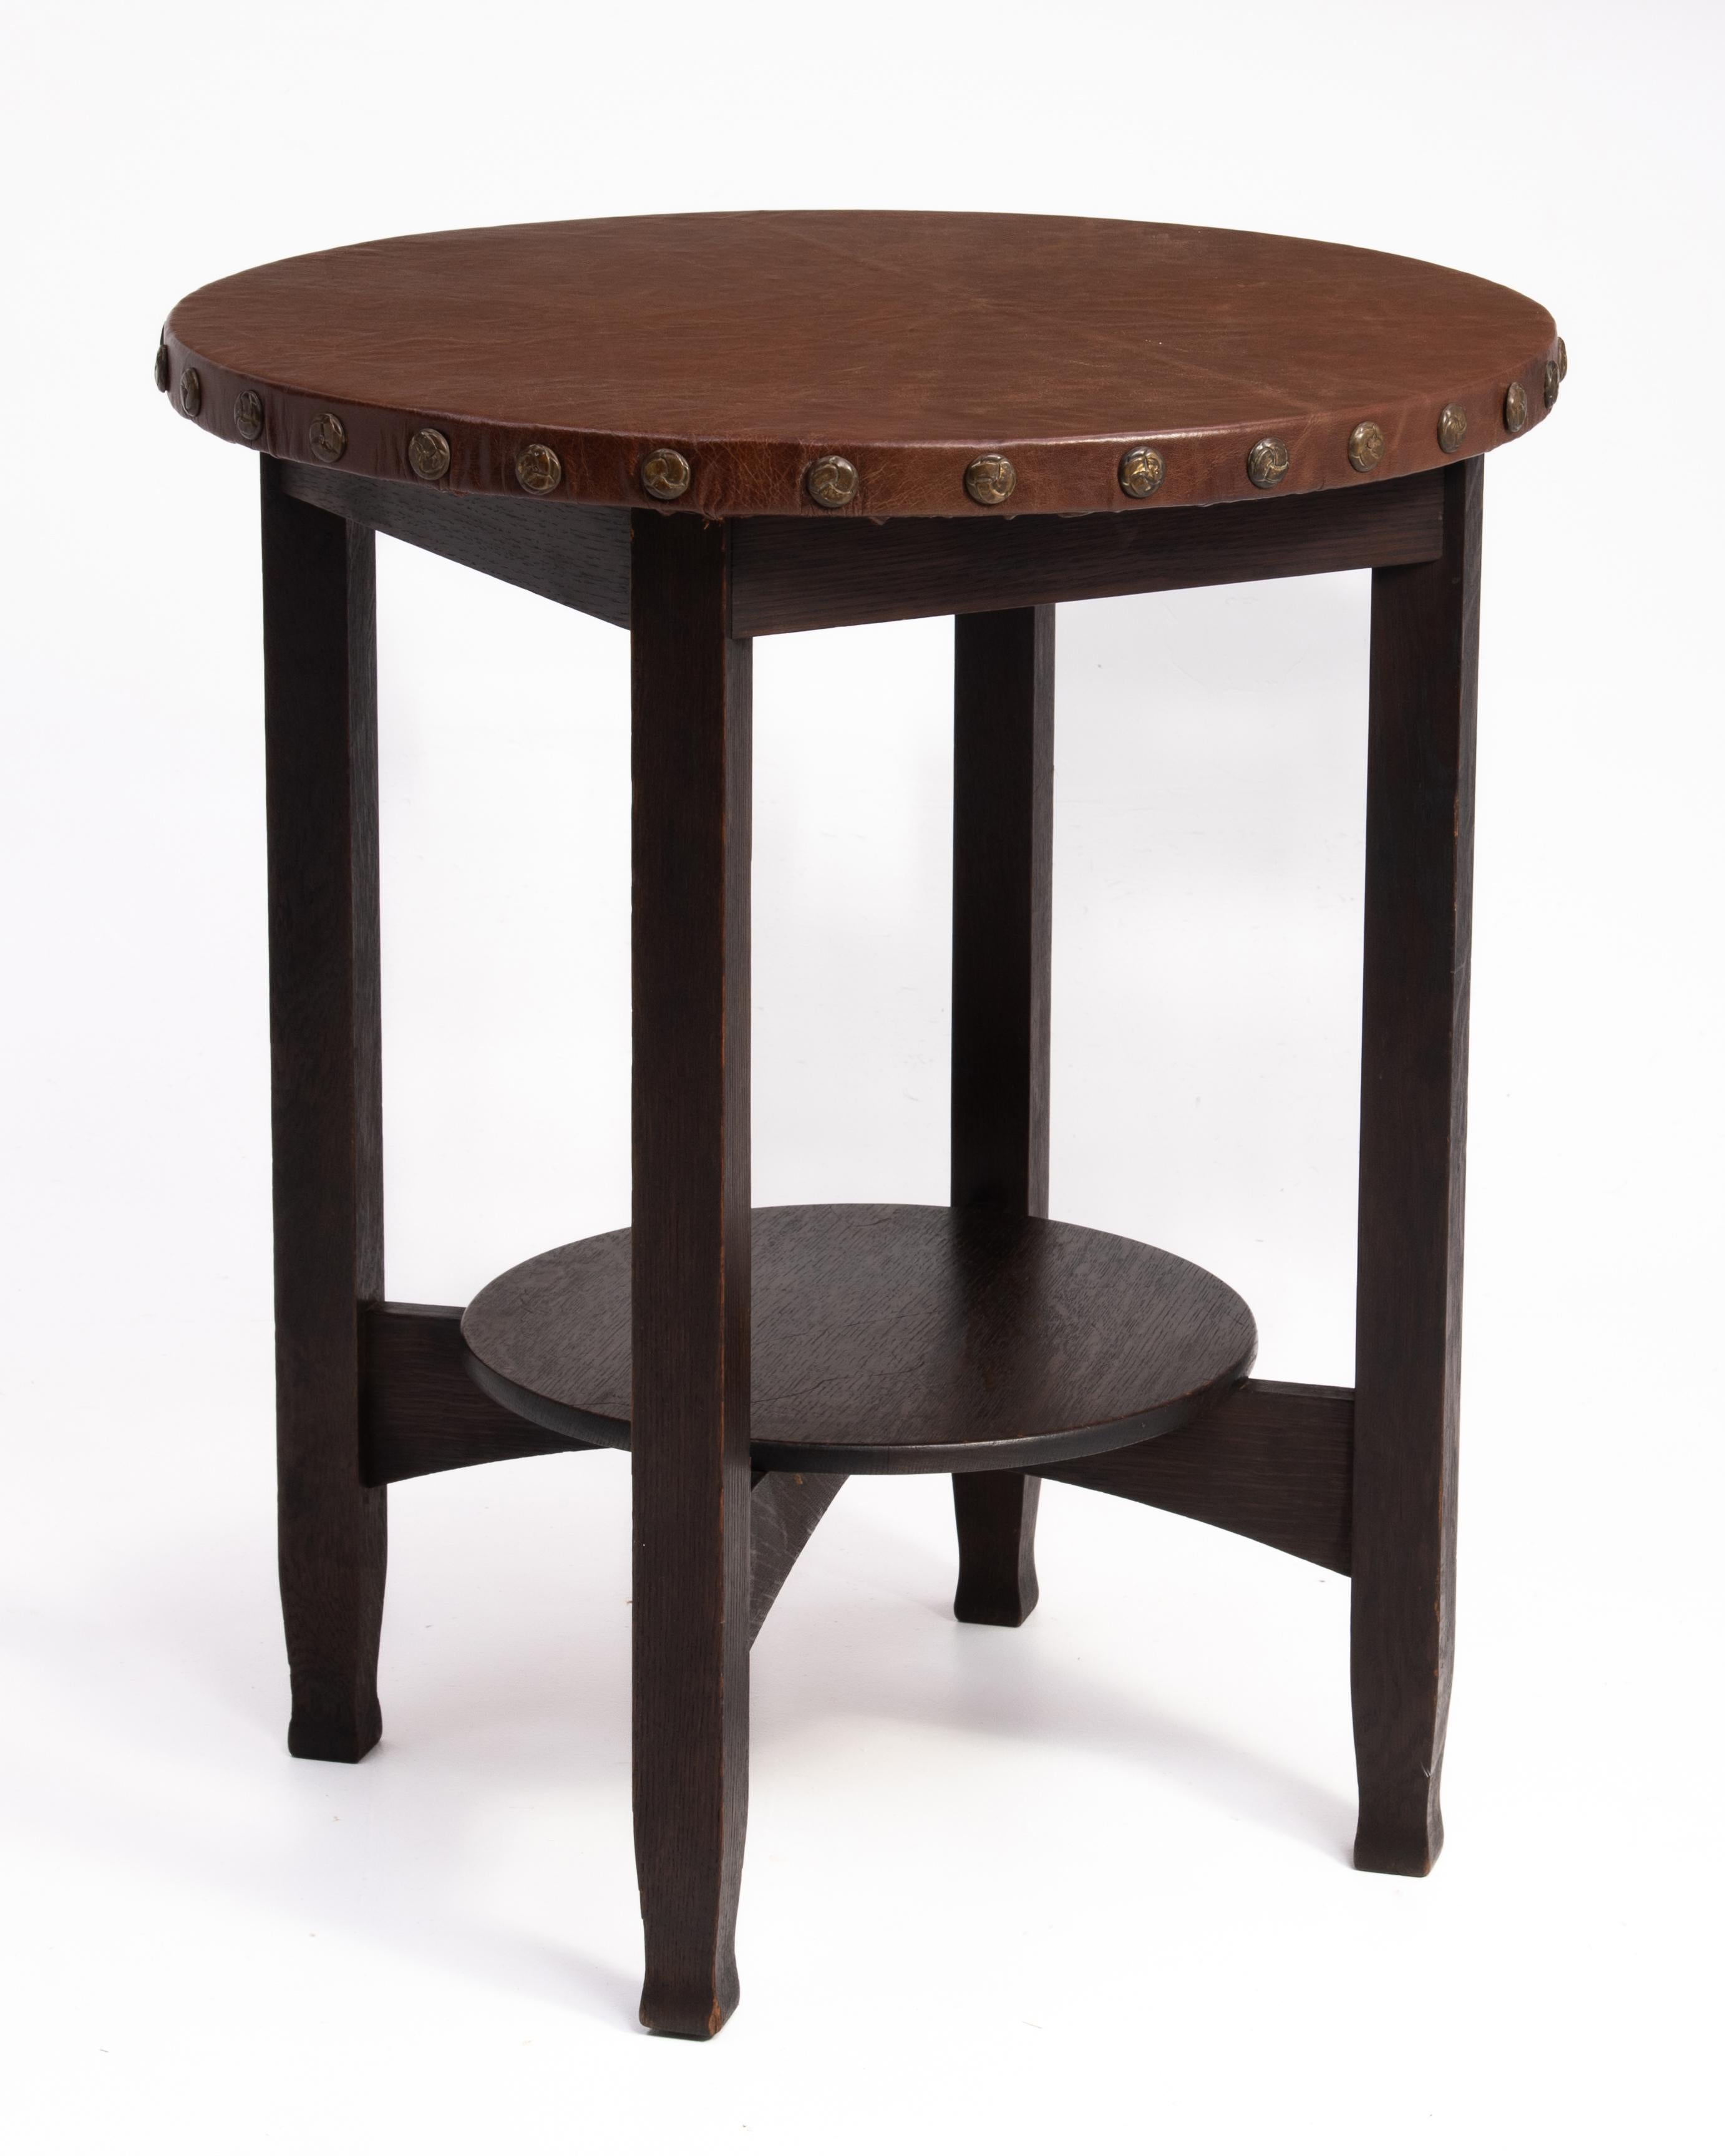 A Stickley Brothers Mission Oak or Arts and Crafts Leather top lamp table. The table is marked with the remant of the oval 